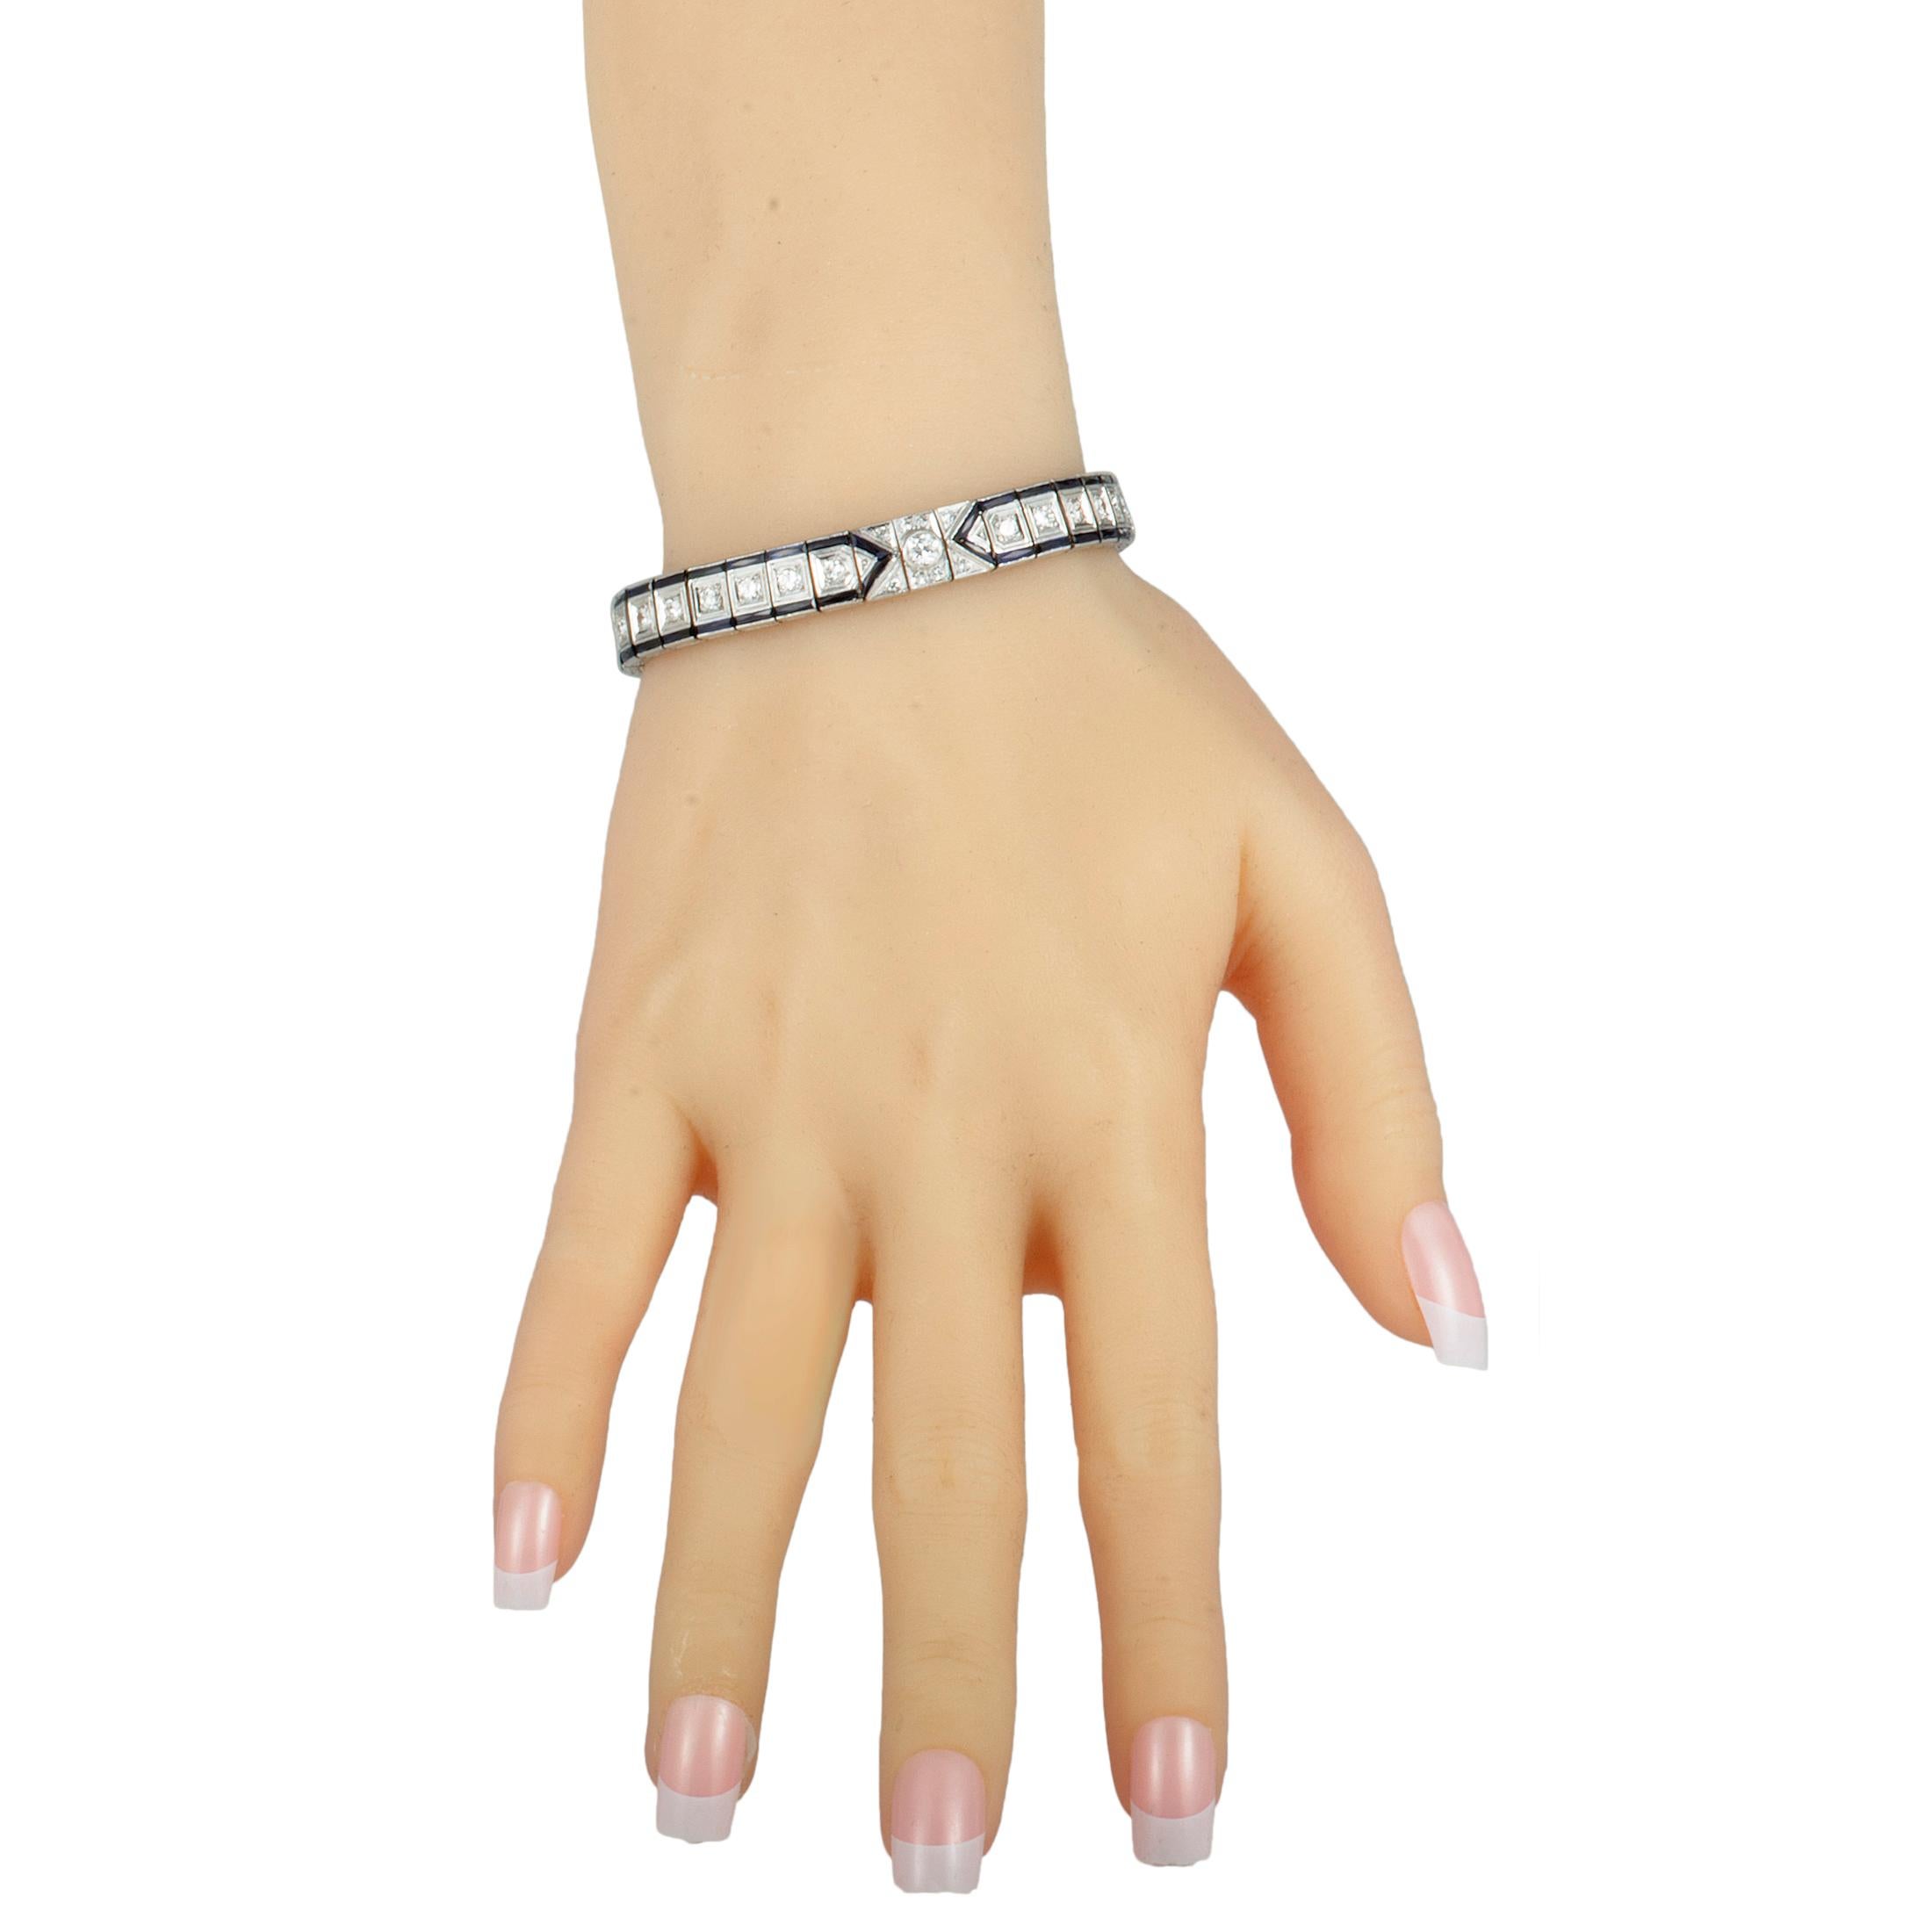 With an exceptionally refined design that is reminiscent of the famed Art Deco style, this sublime bracelet boasts a compellingly classy appeal. The bracelet is made of elegant platinum and embellished with a total of approximately 3.50 carats of